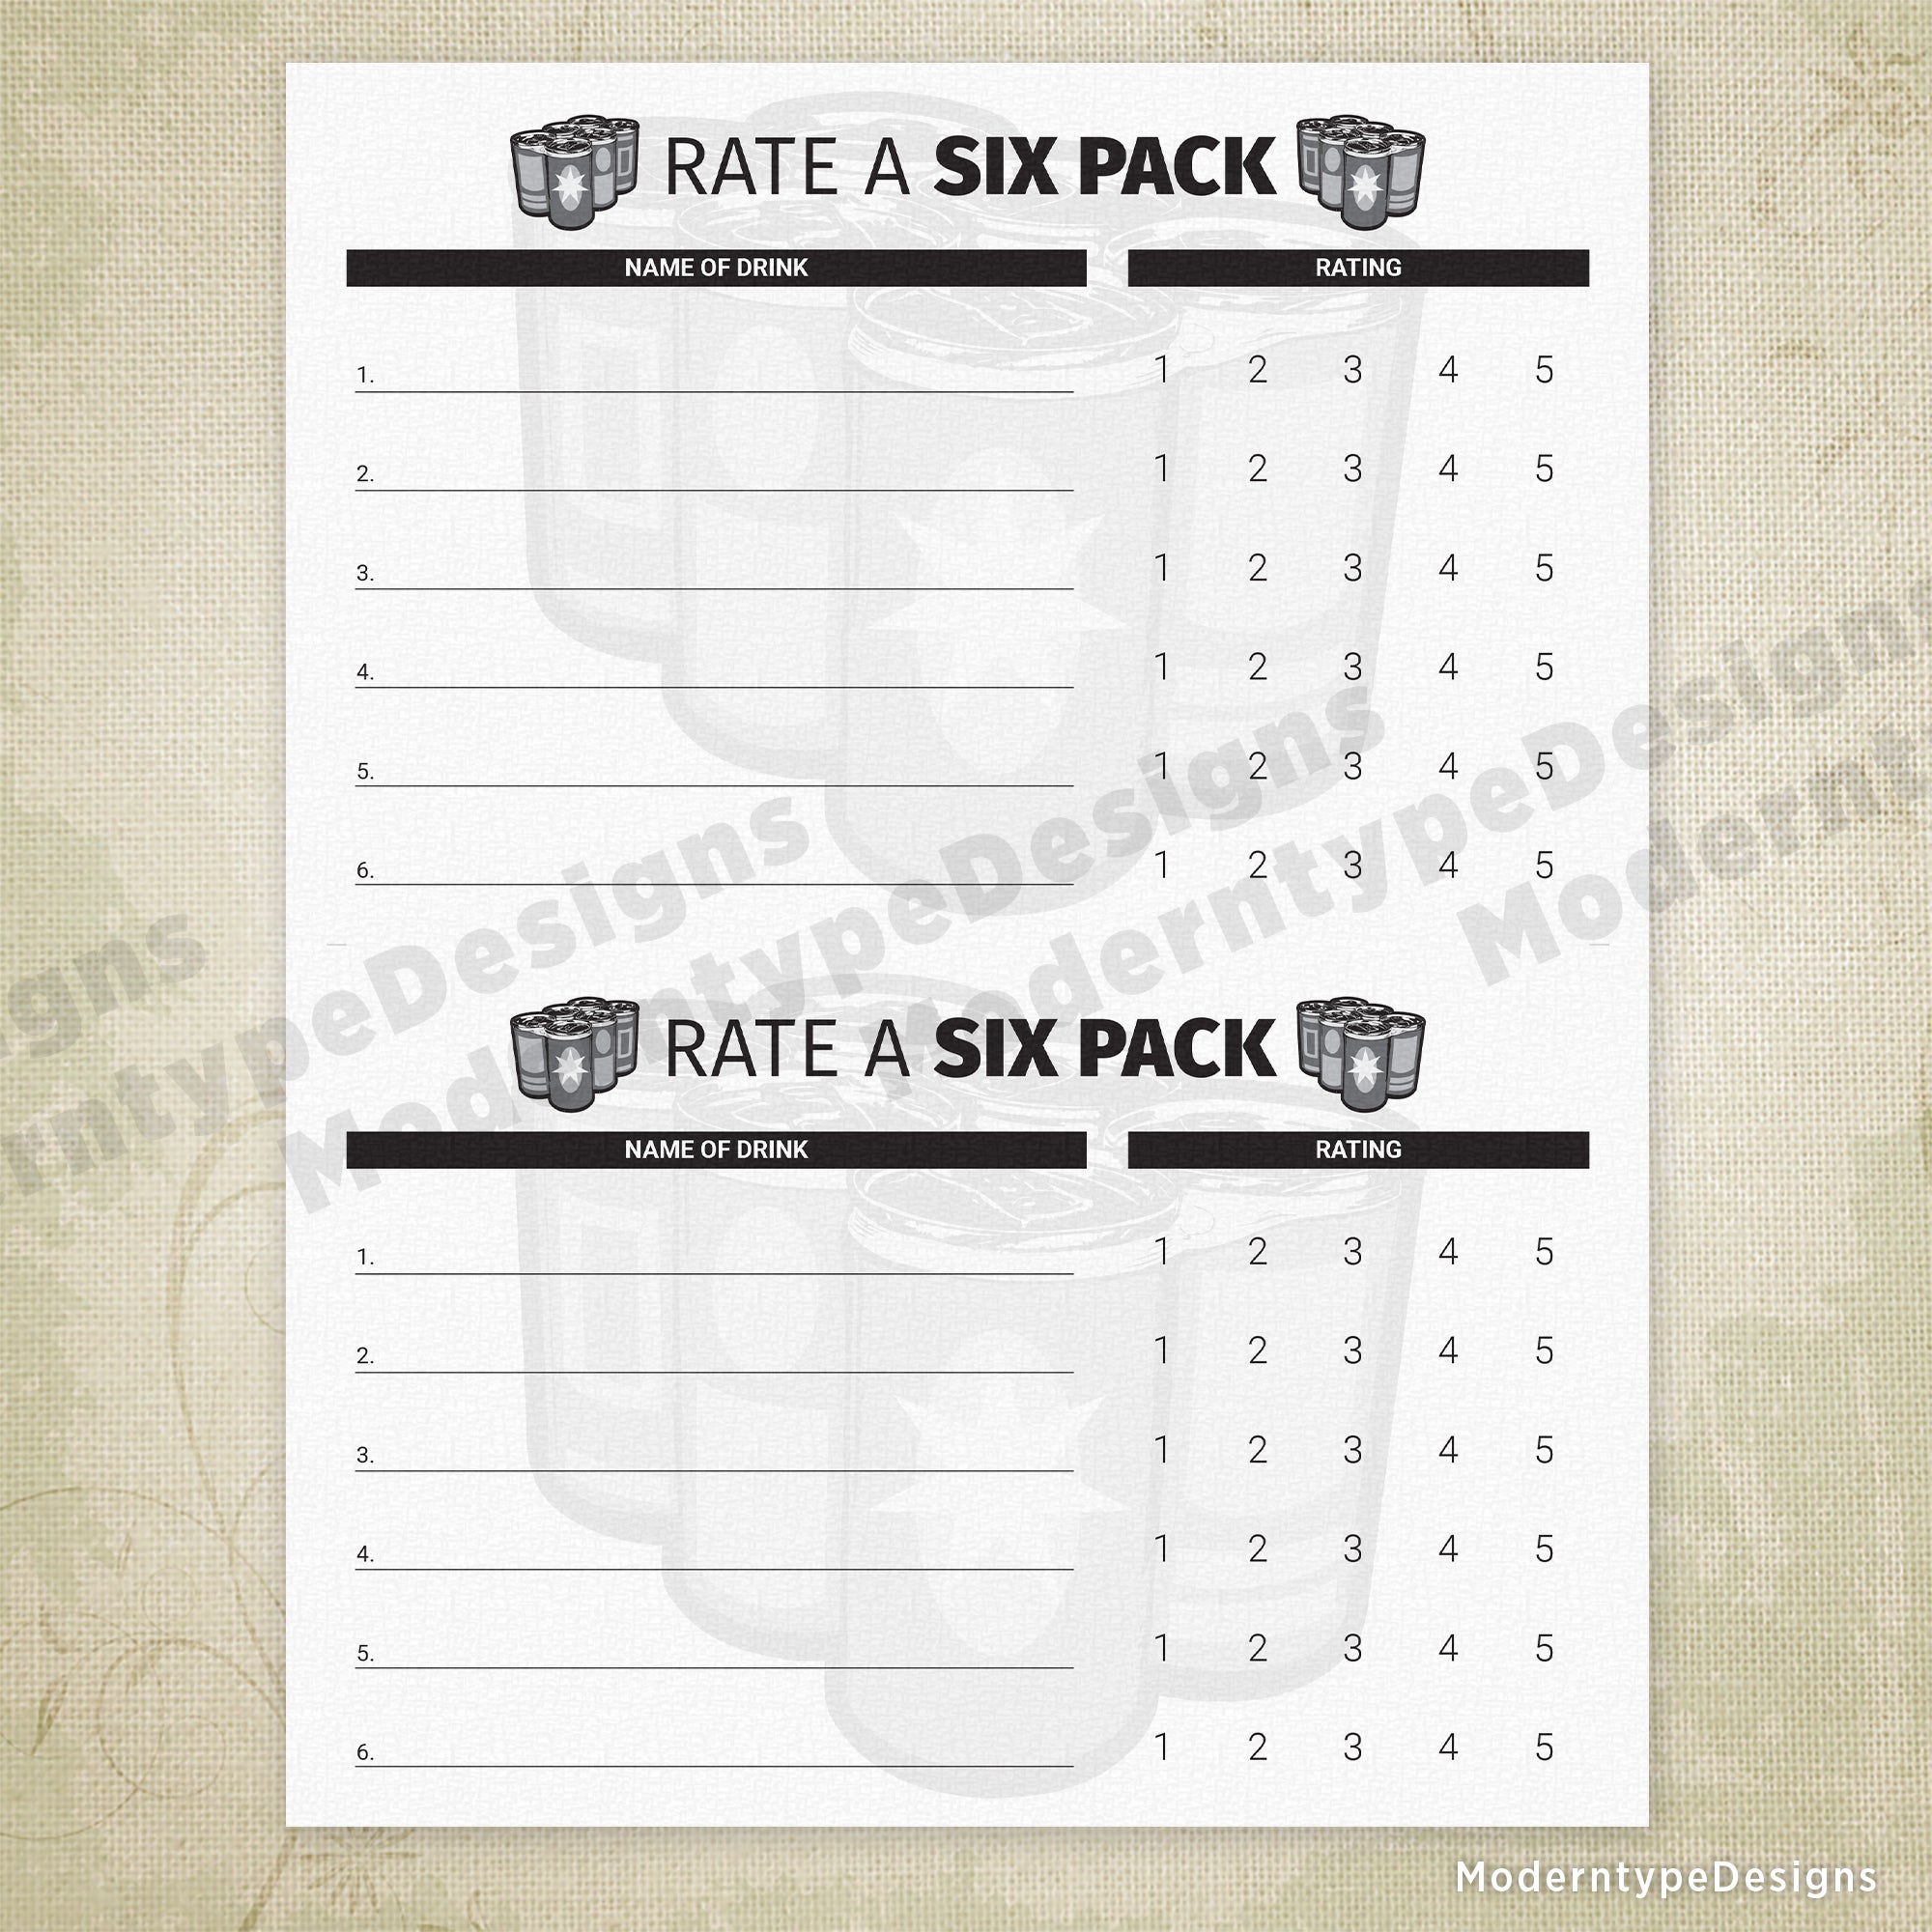 Rate a Six Pack Printable, 6 Different Beers, 8.5 x 5.5"